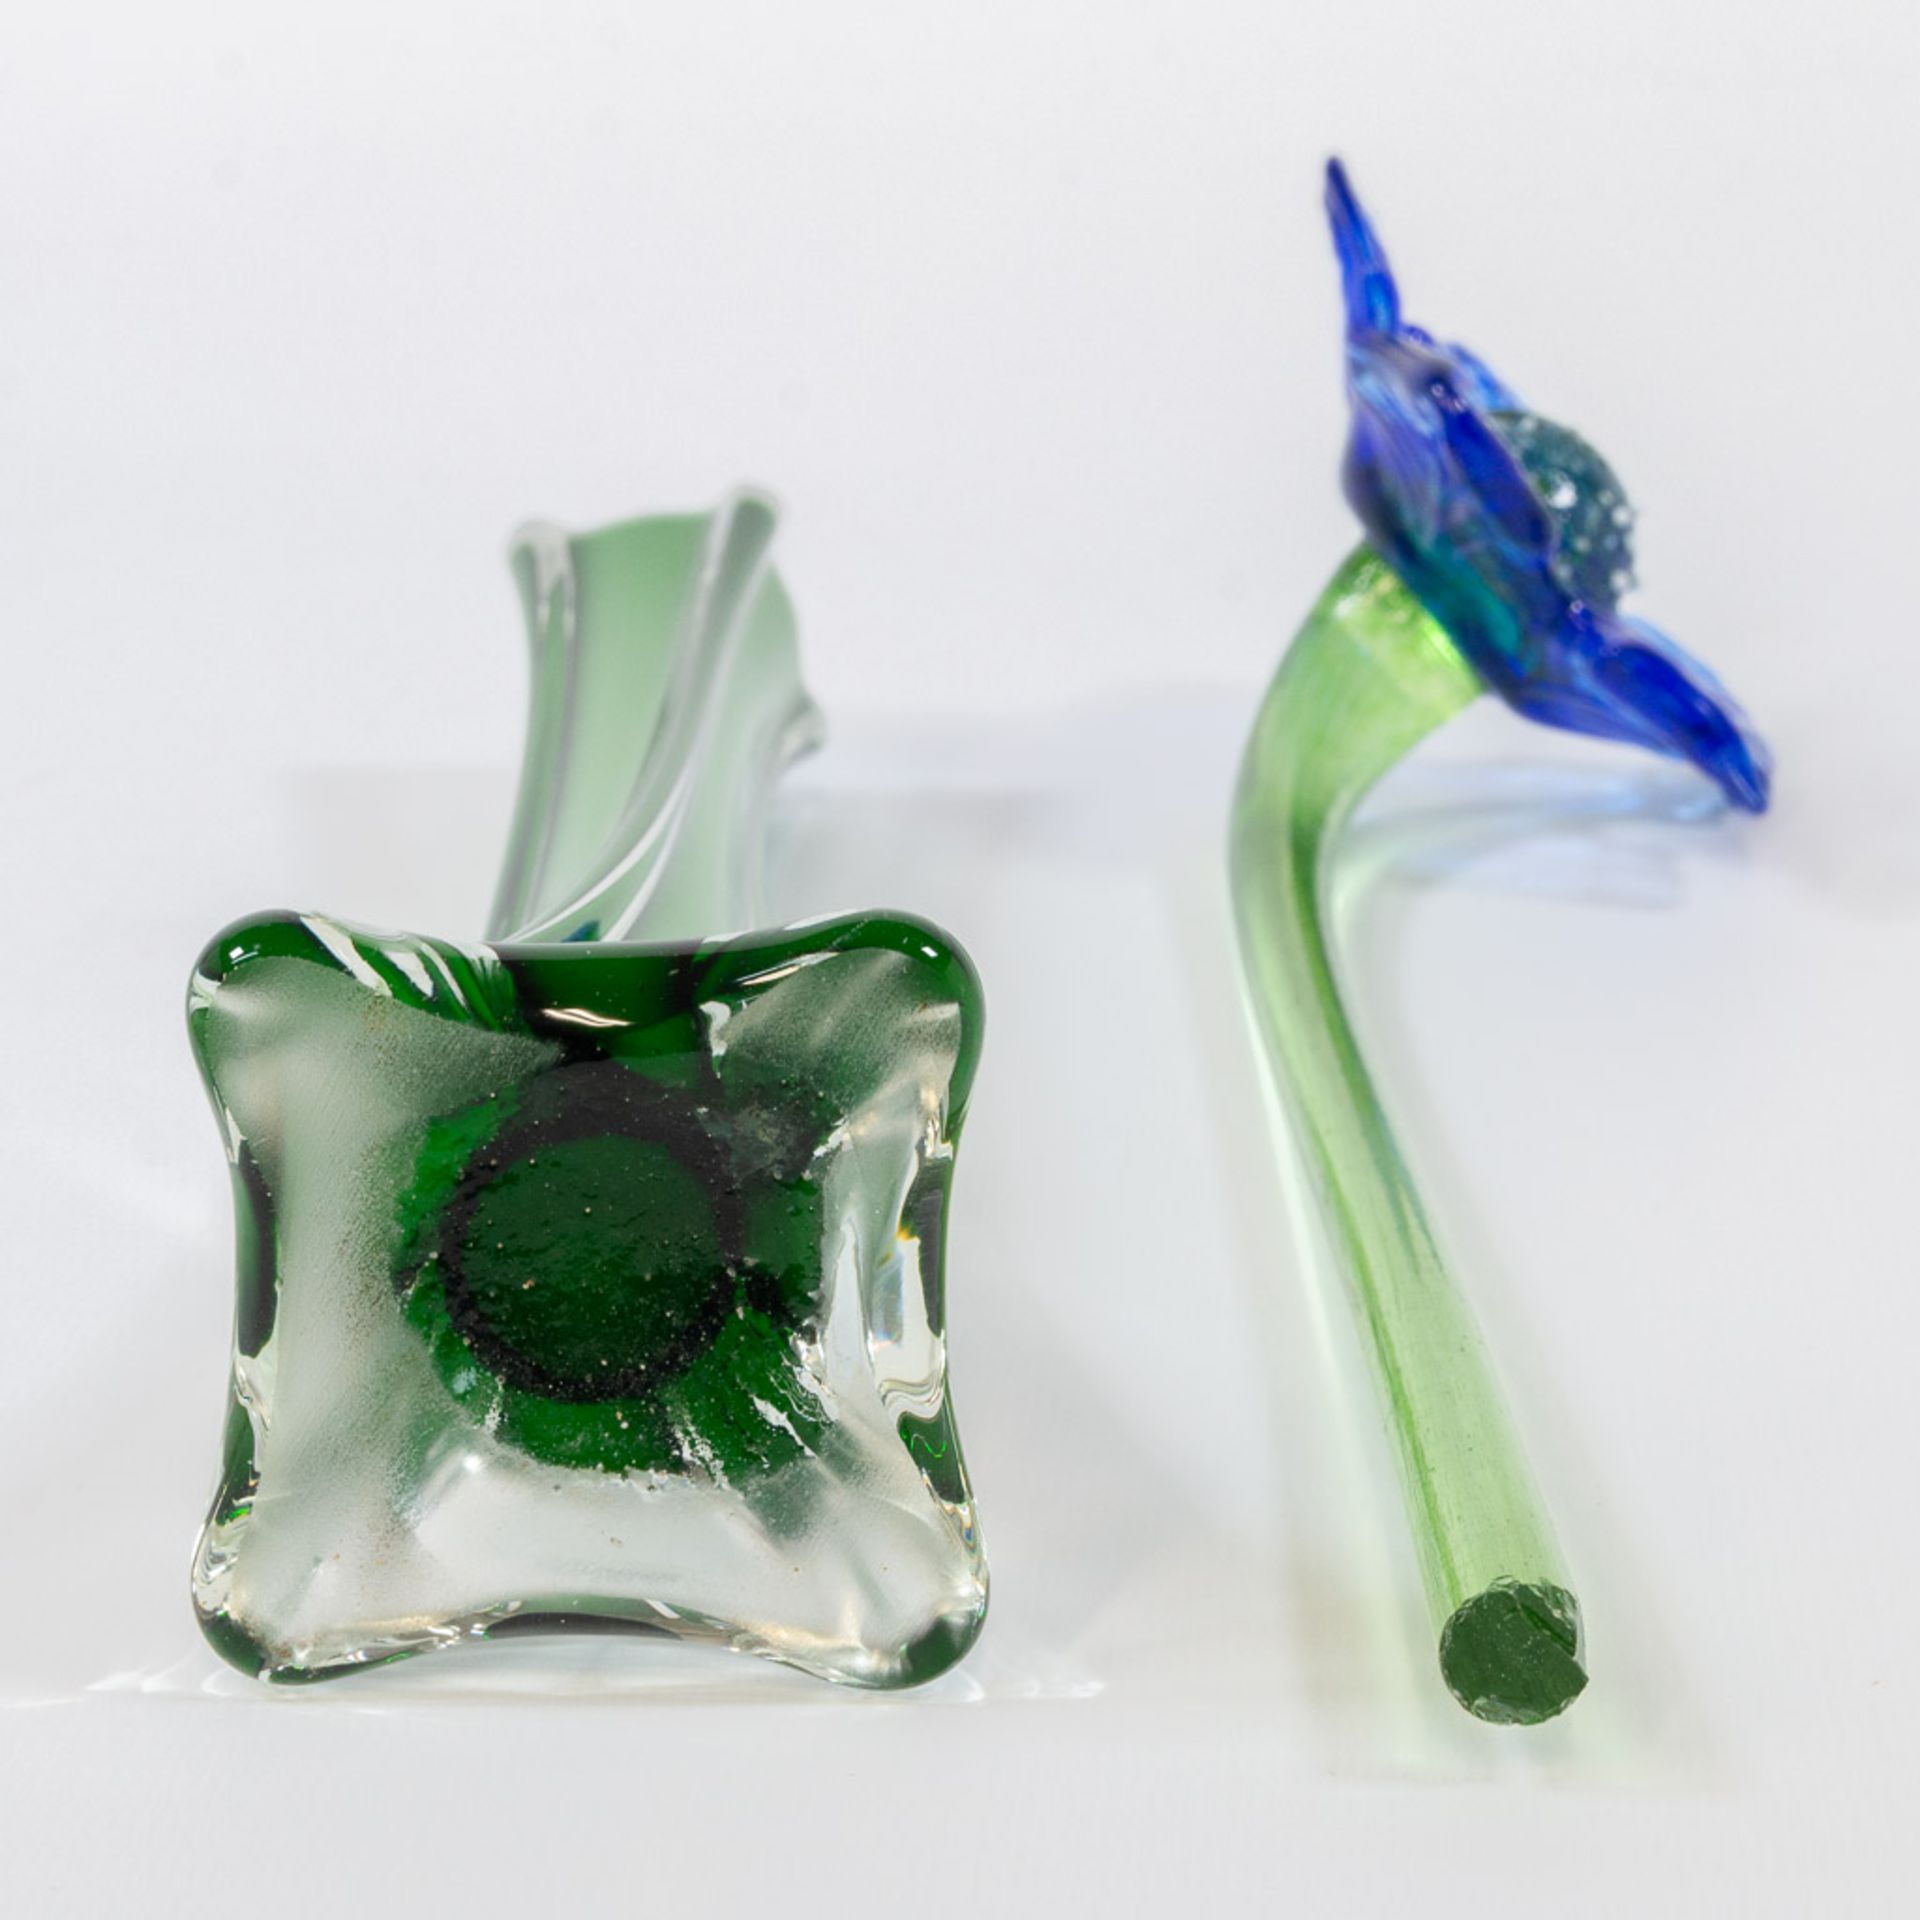 A collection of 4 vases and 4 glass flowers made in Murano, Italy. - Image 34 of 49